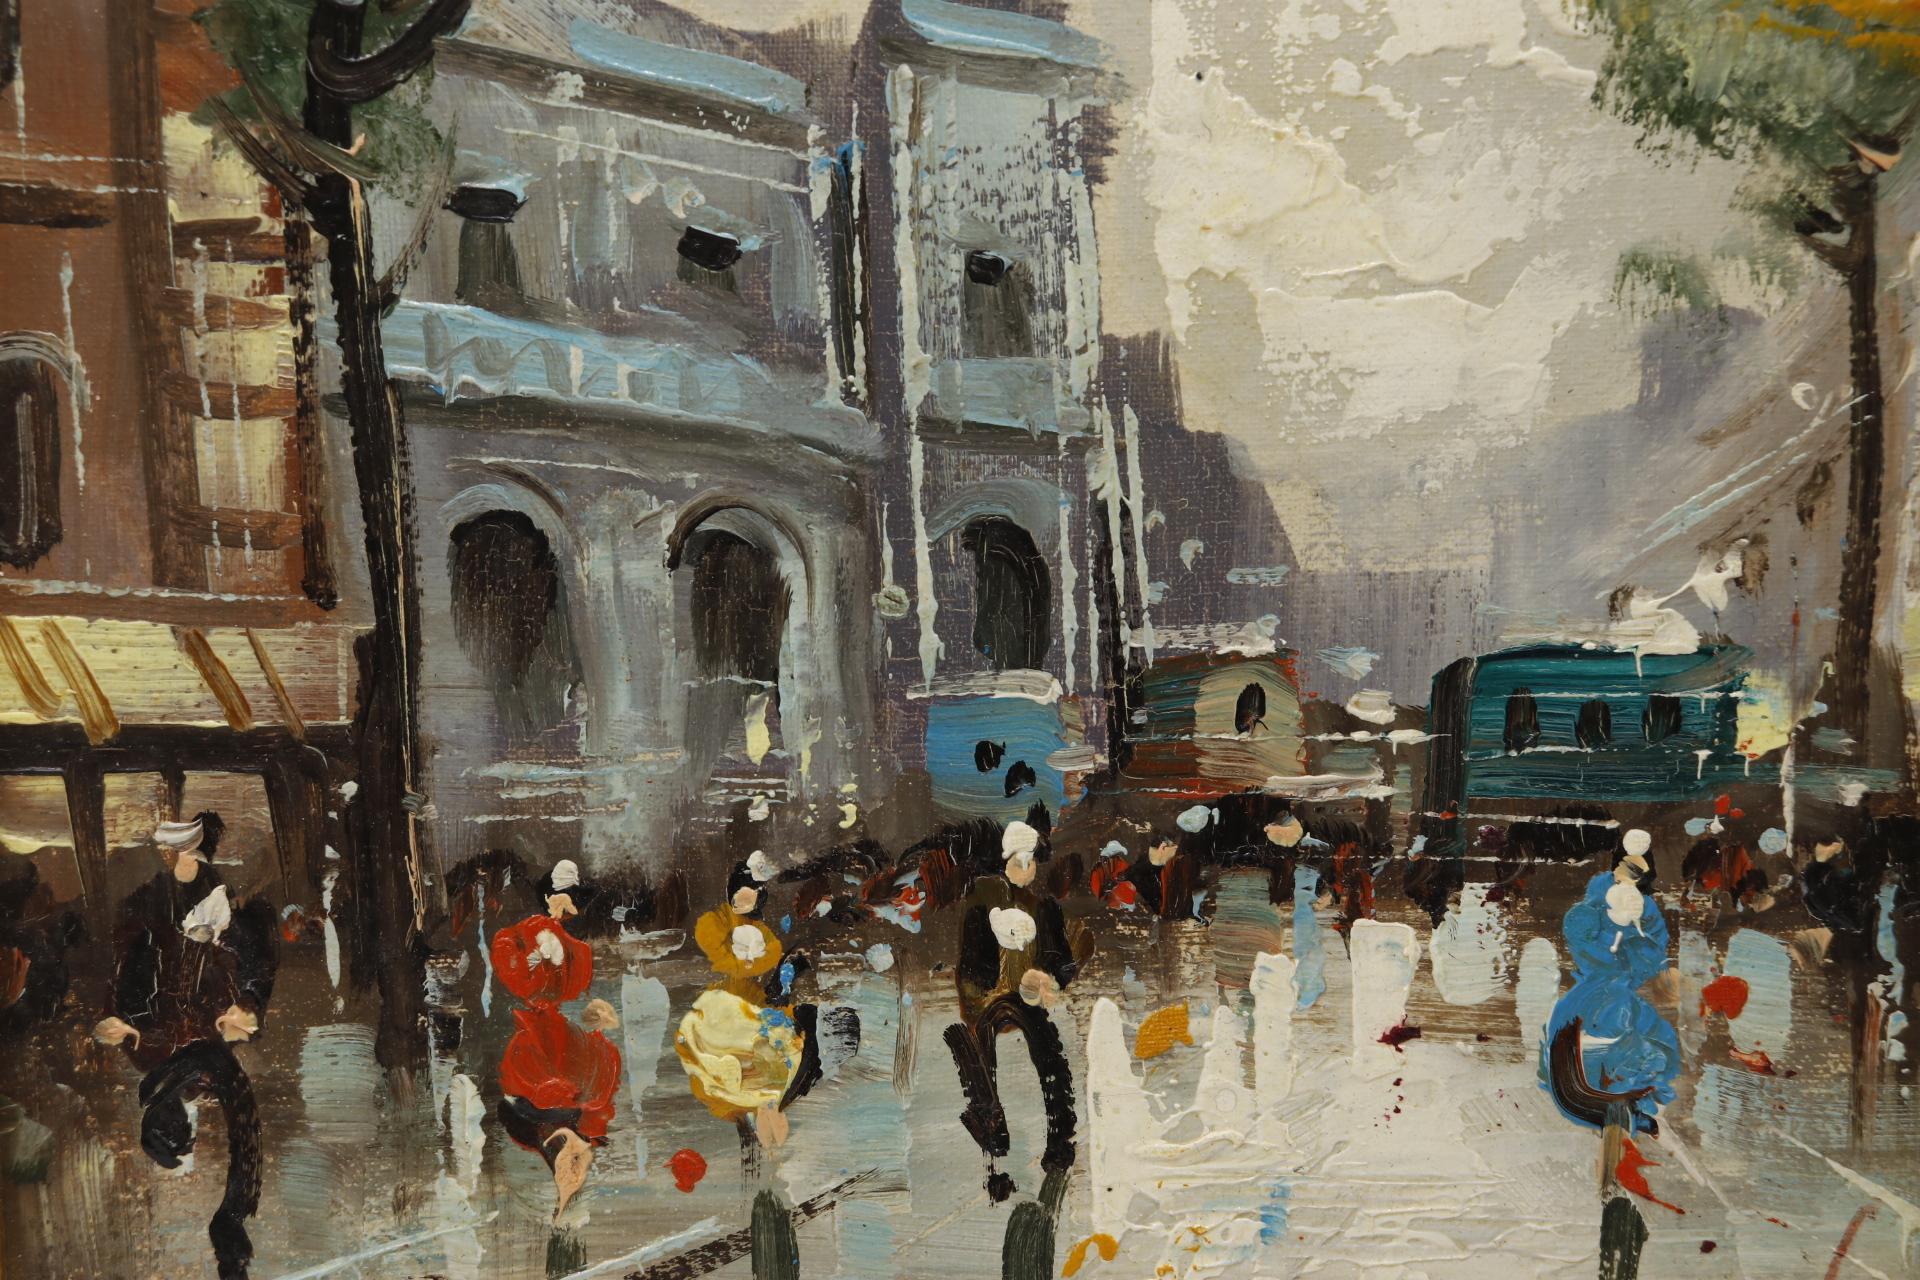 A set of two framed impressionist oil paintings on canvas. European street scenes are rich with impasto texture, with figures and buildings in bold color set against gray skies and wet floors. Signed in the lower right by the artist and set in a